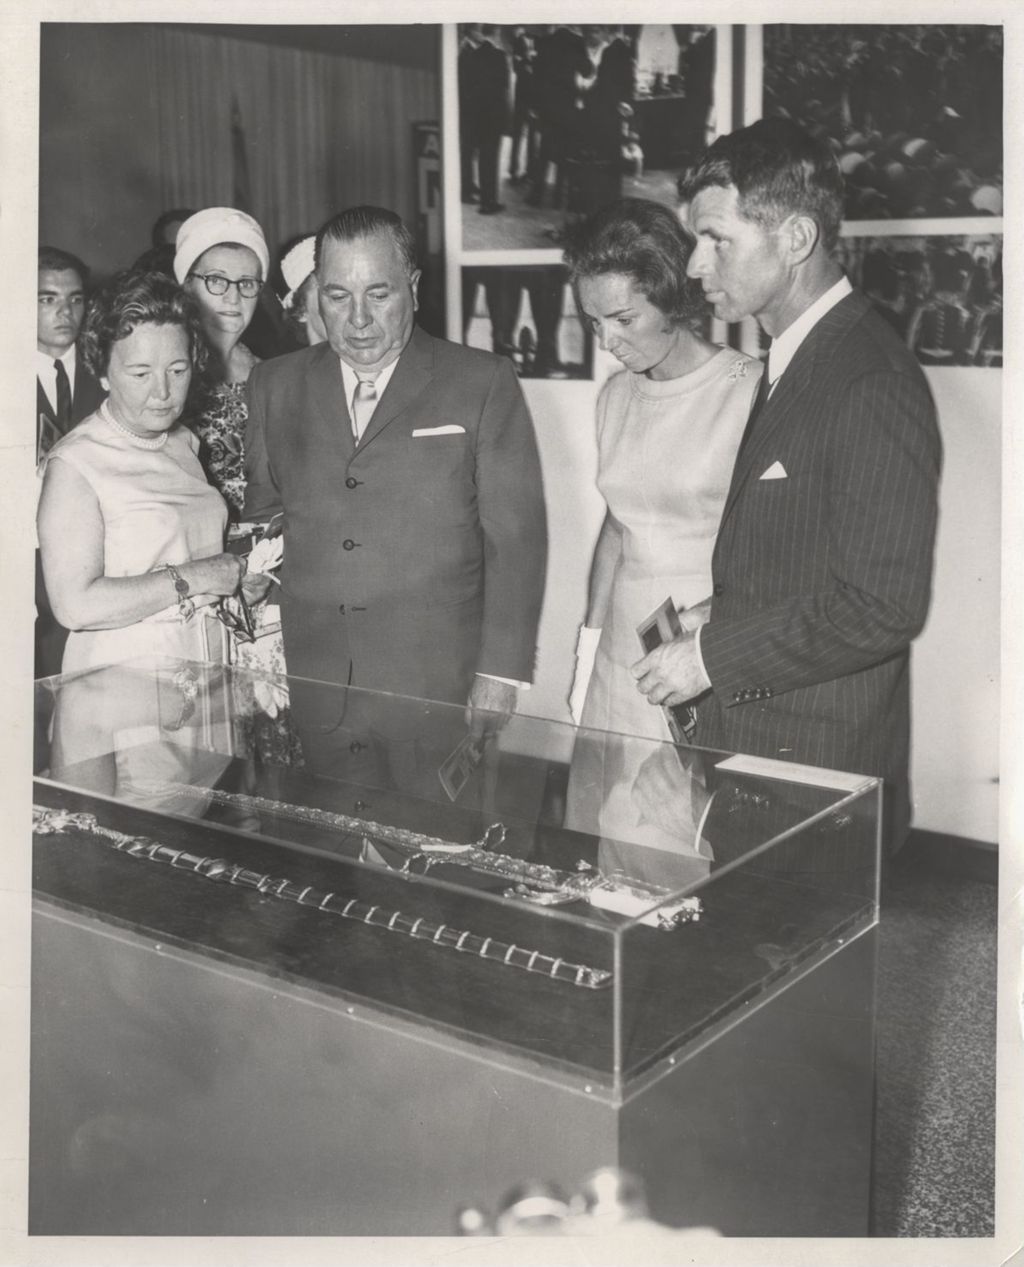 Miniature of Ethel and Robert Kennedy with Eleanor and Richard J. Daley at an exhibition